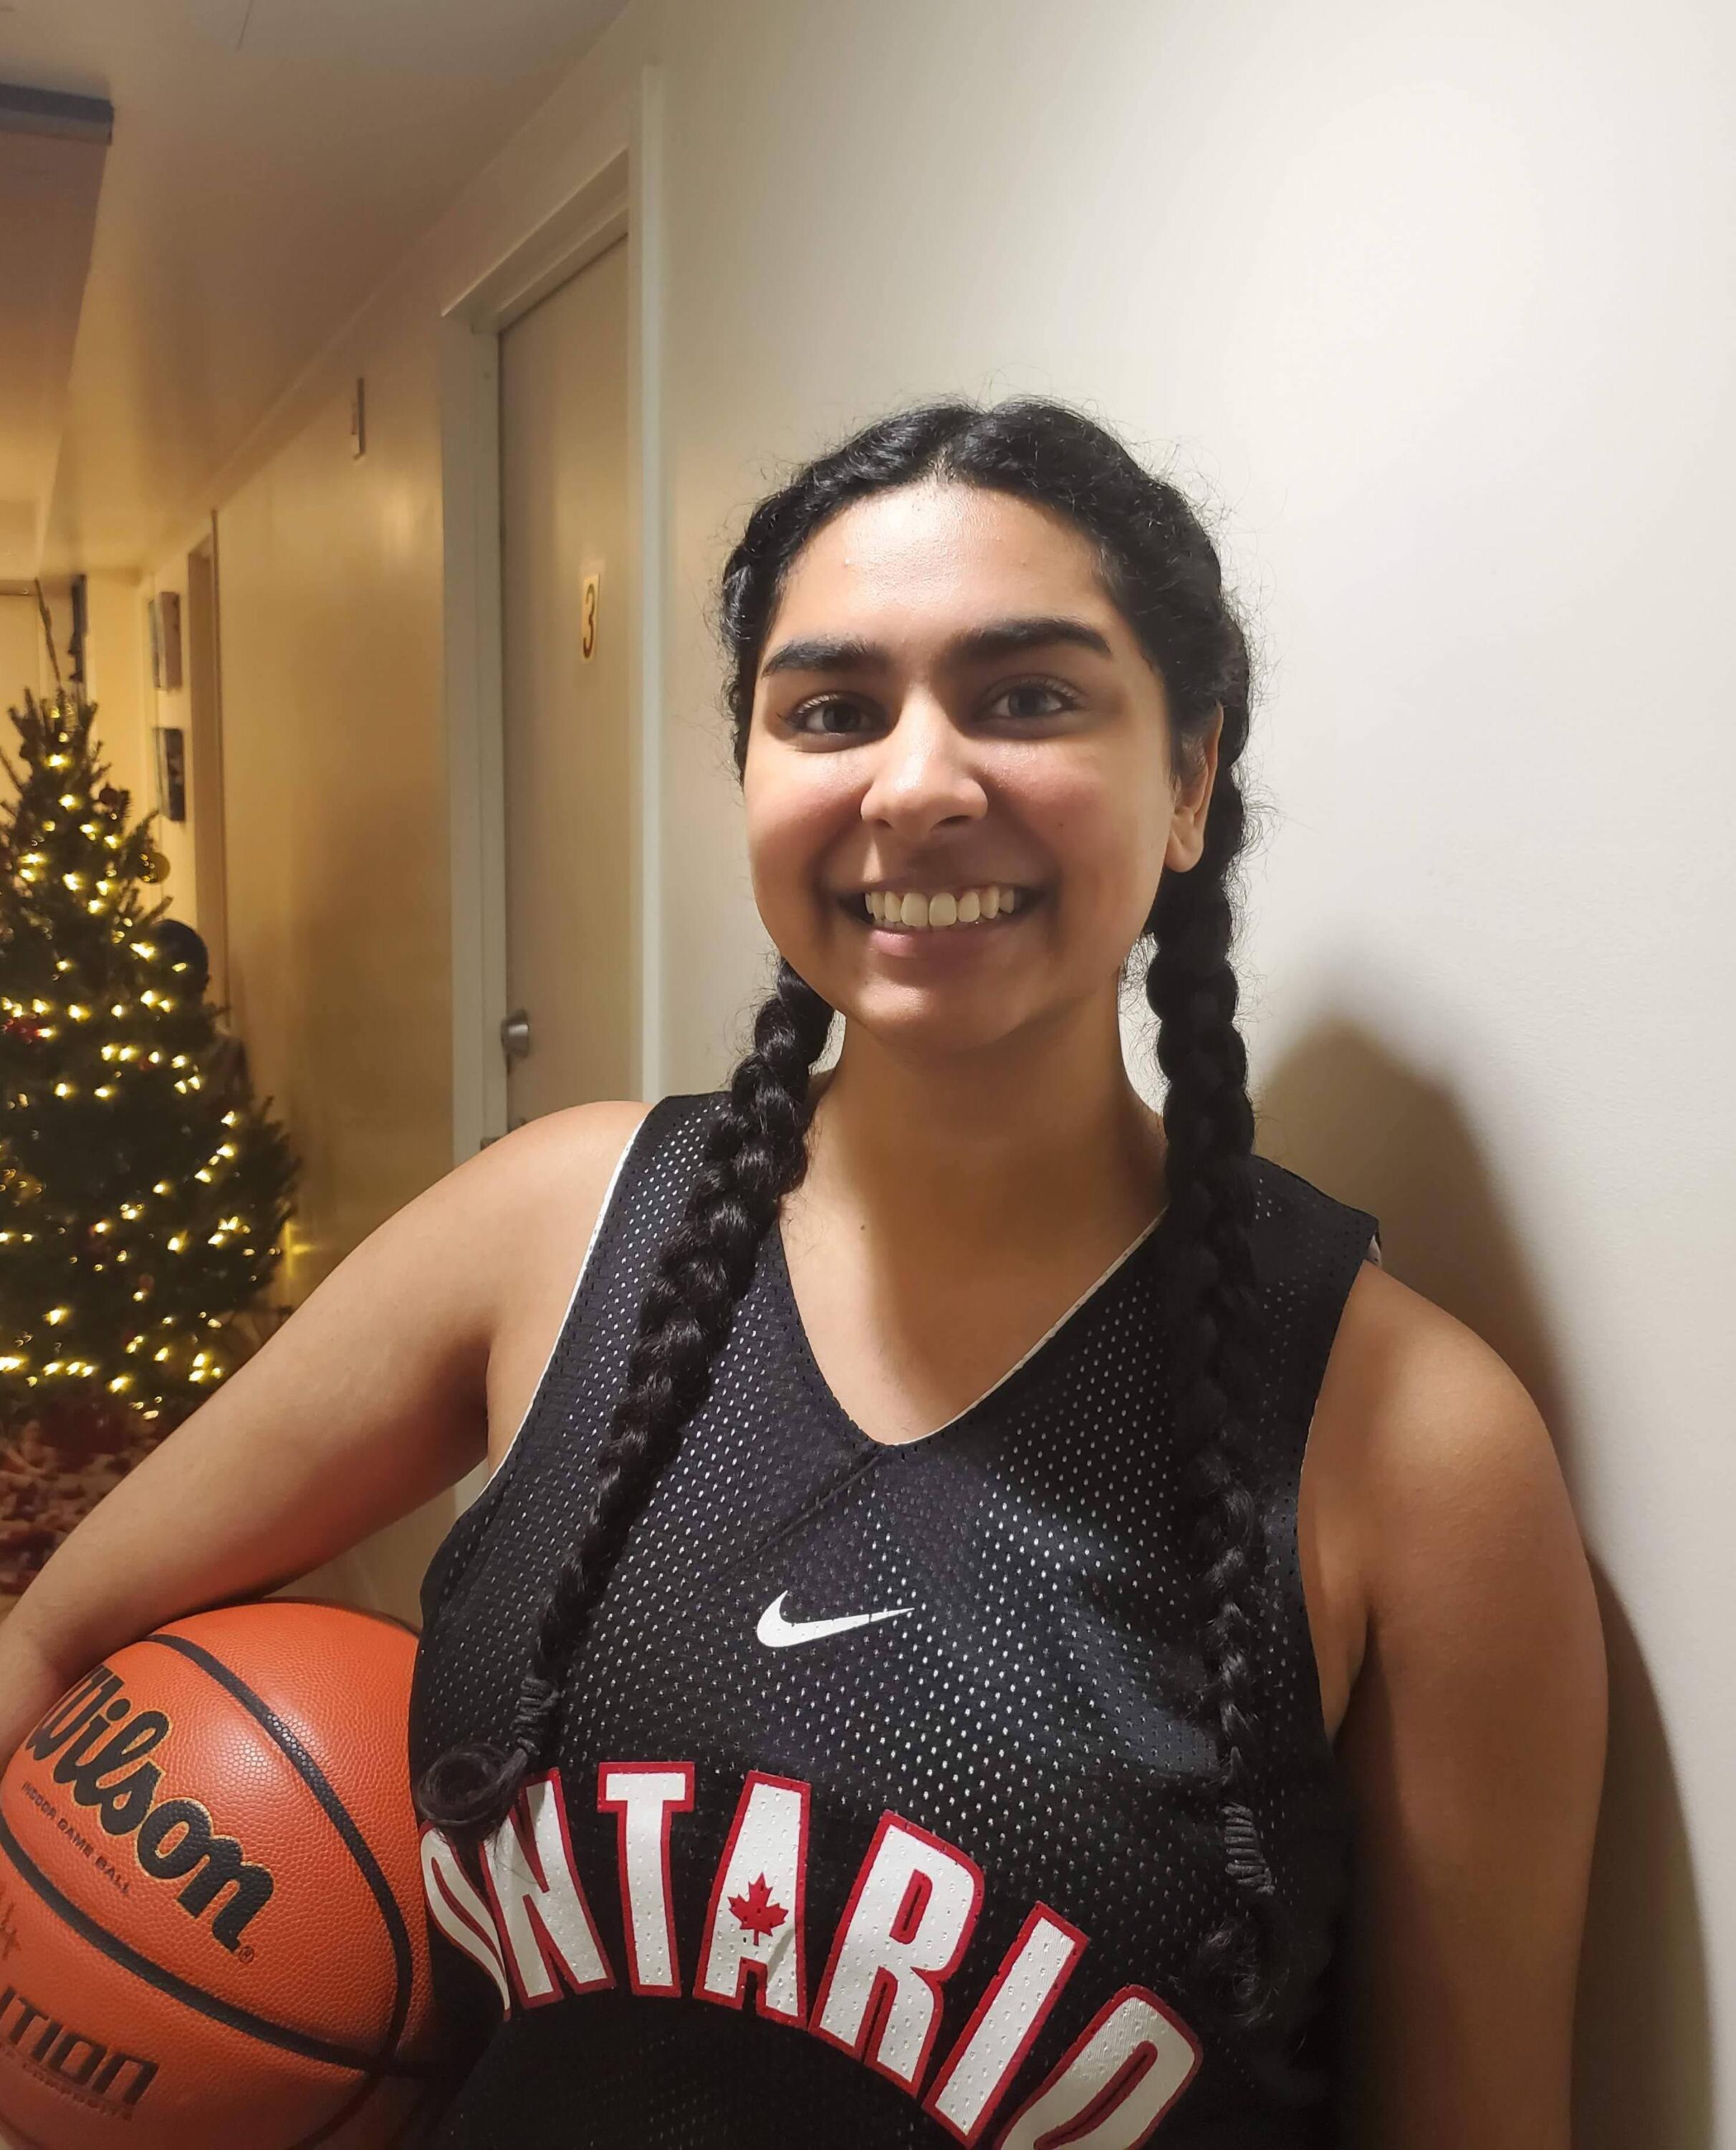 Natalie Fernandez wearing a jersey and holding a basketball